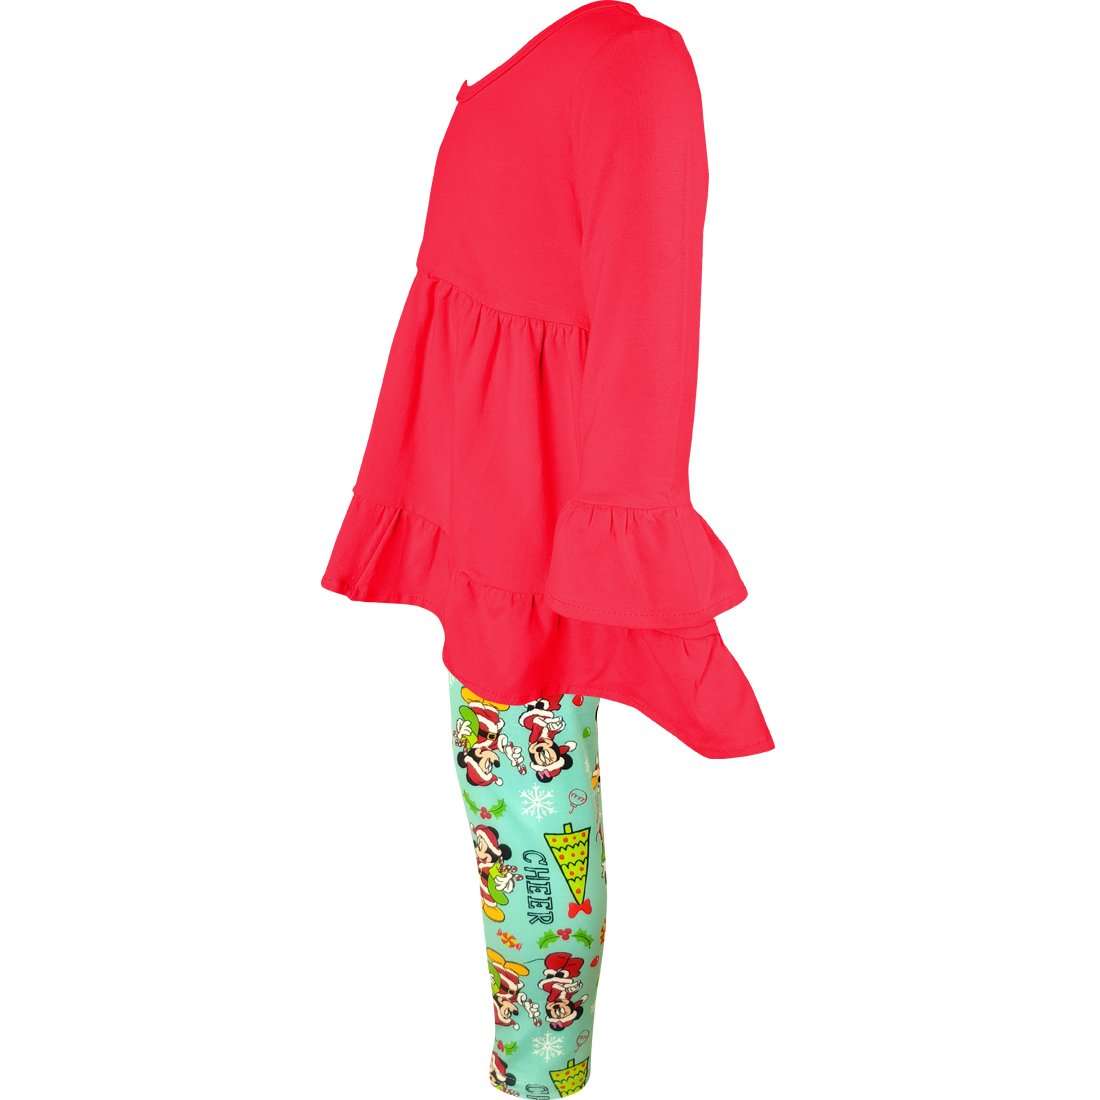 Angeline Kids:Toddler Little Girls Disney Christmas Minnie Mickey Mouse Scarf Outfit - Hot Pink Mint